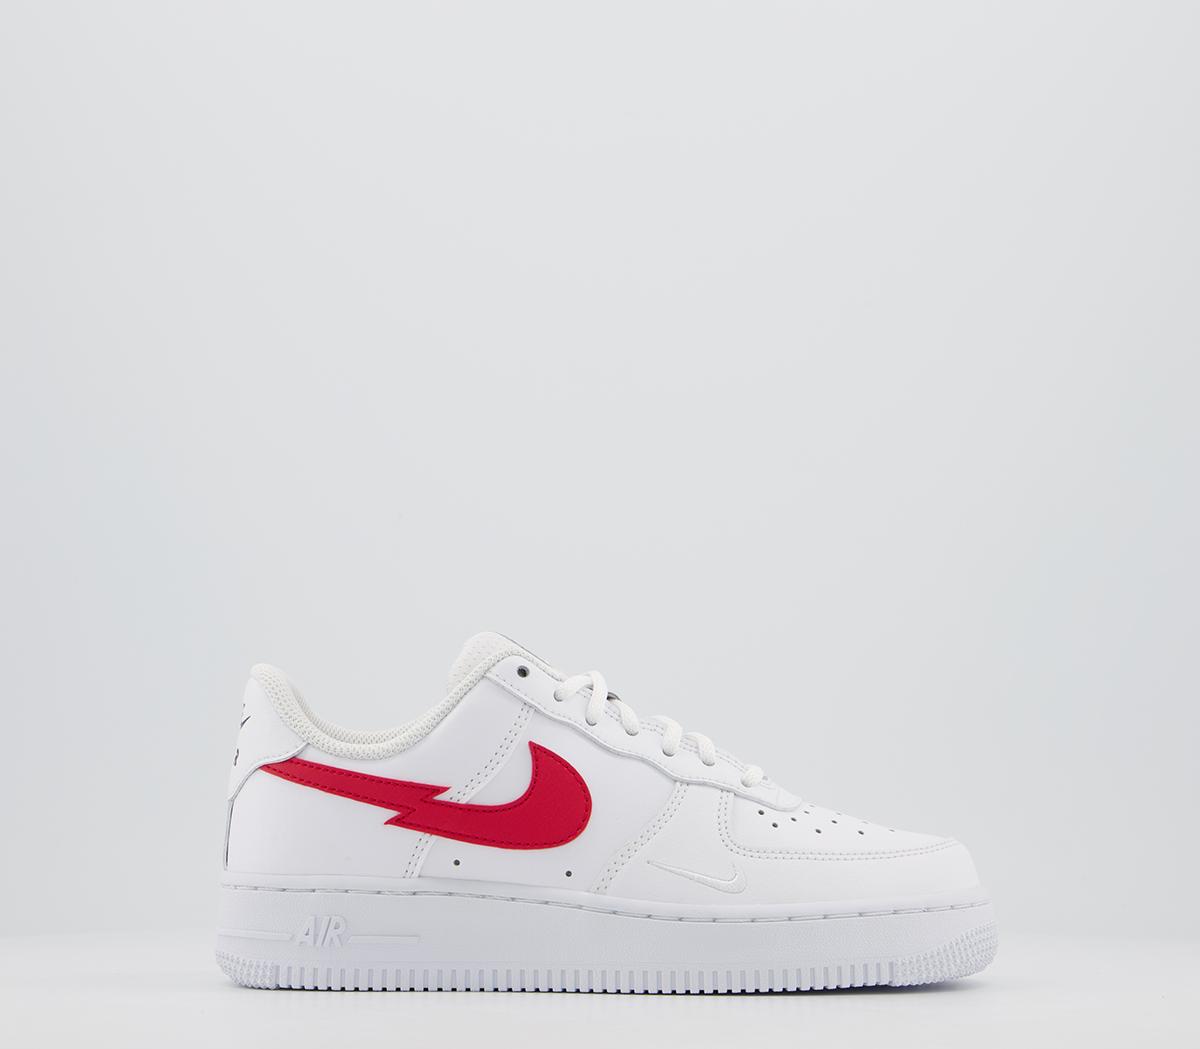 Reserve hide Lodge Nike Nike Air Force 1 Trainers Euro Championship 20 Pack - Gift Guide